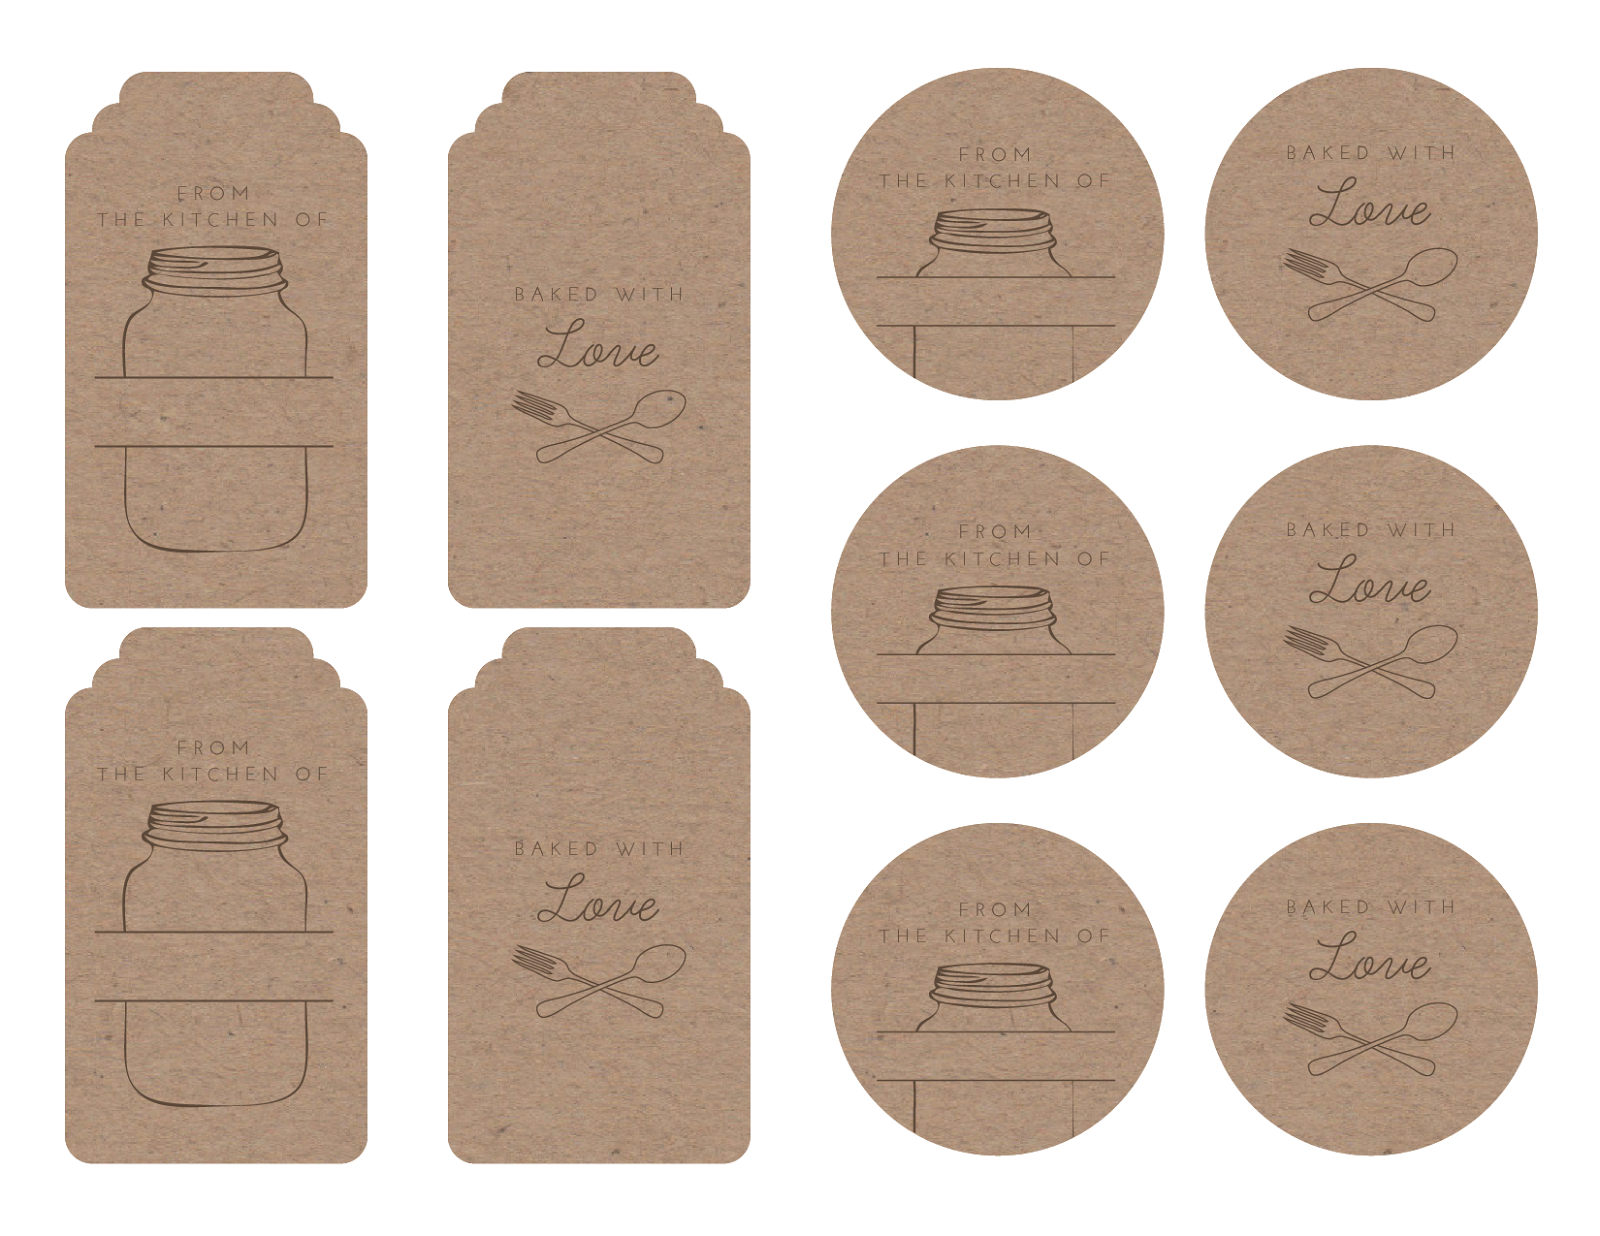 Homemade Tags For Your Baked Goods | Printables &amp;amp; Graphics - Free Printable Baking Labels